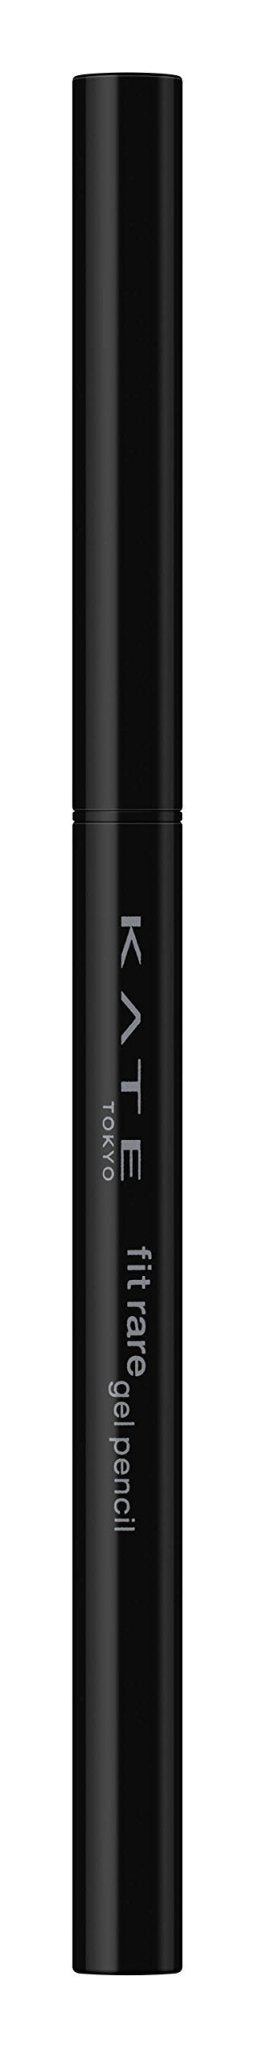 Kate Rare Fit Gel Eye Pencil in BR - 1 Brown 0.08g - Discontinued Manufacturer